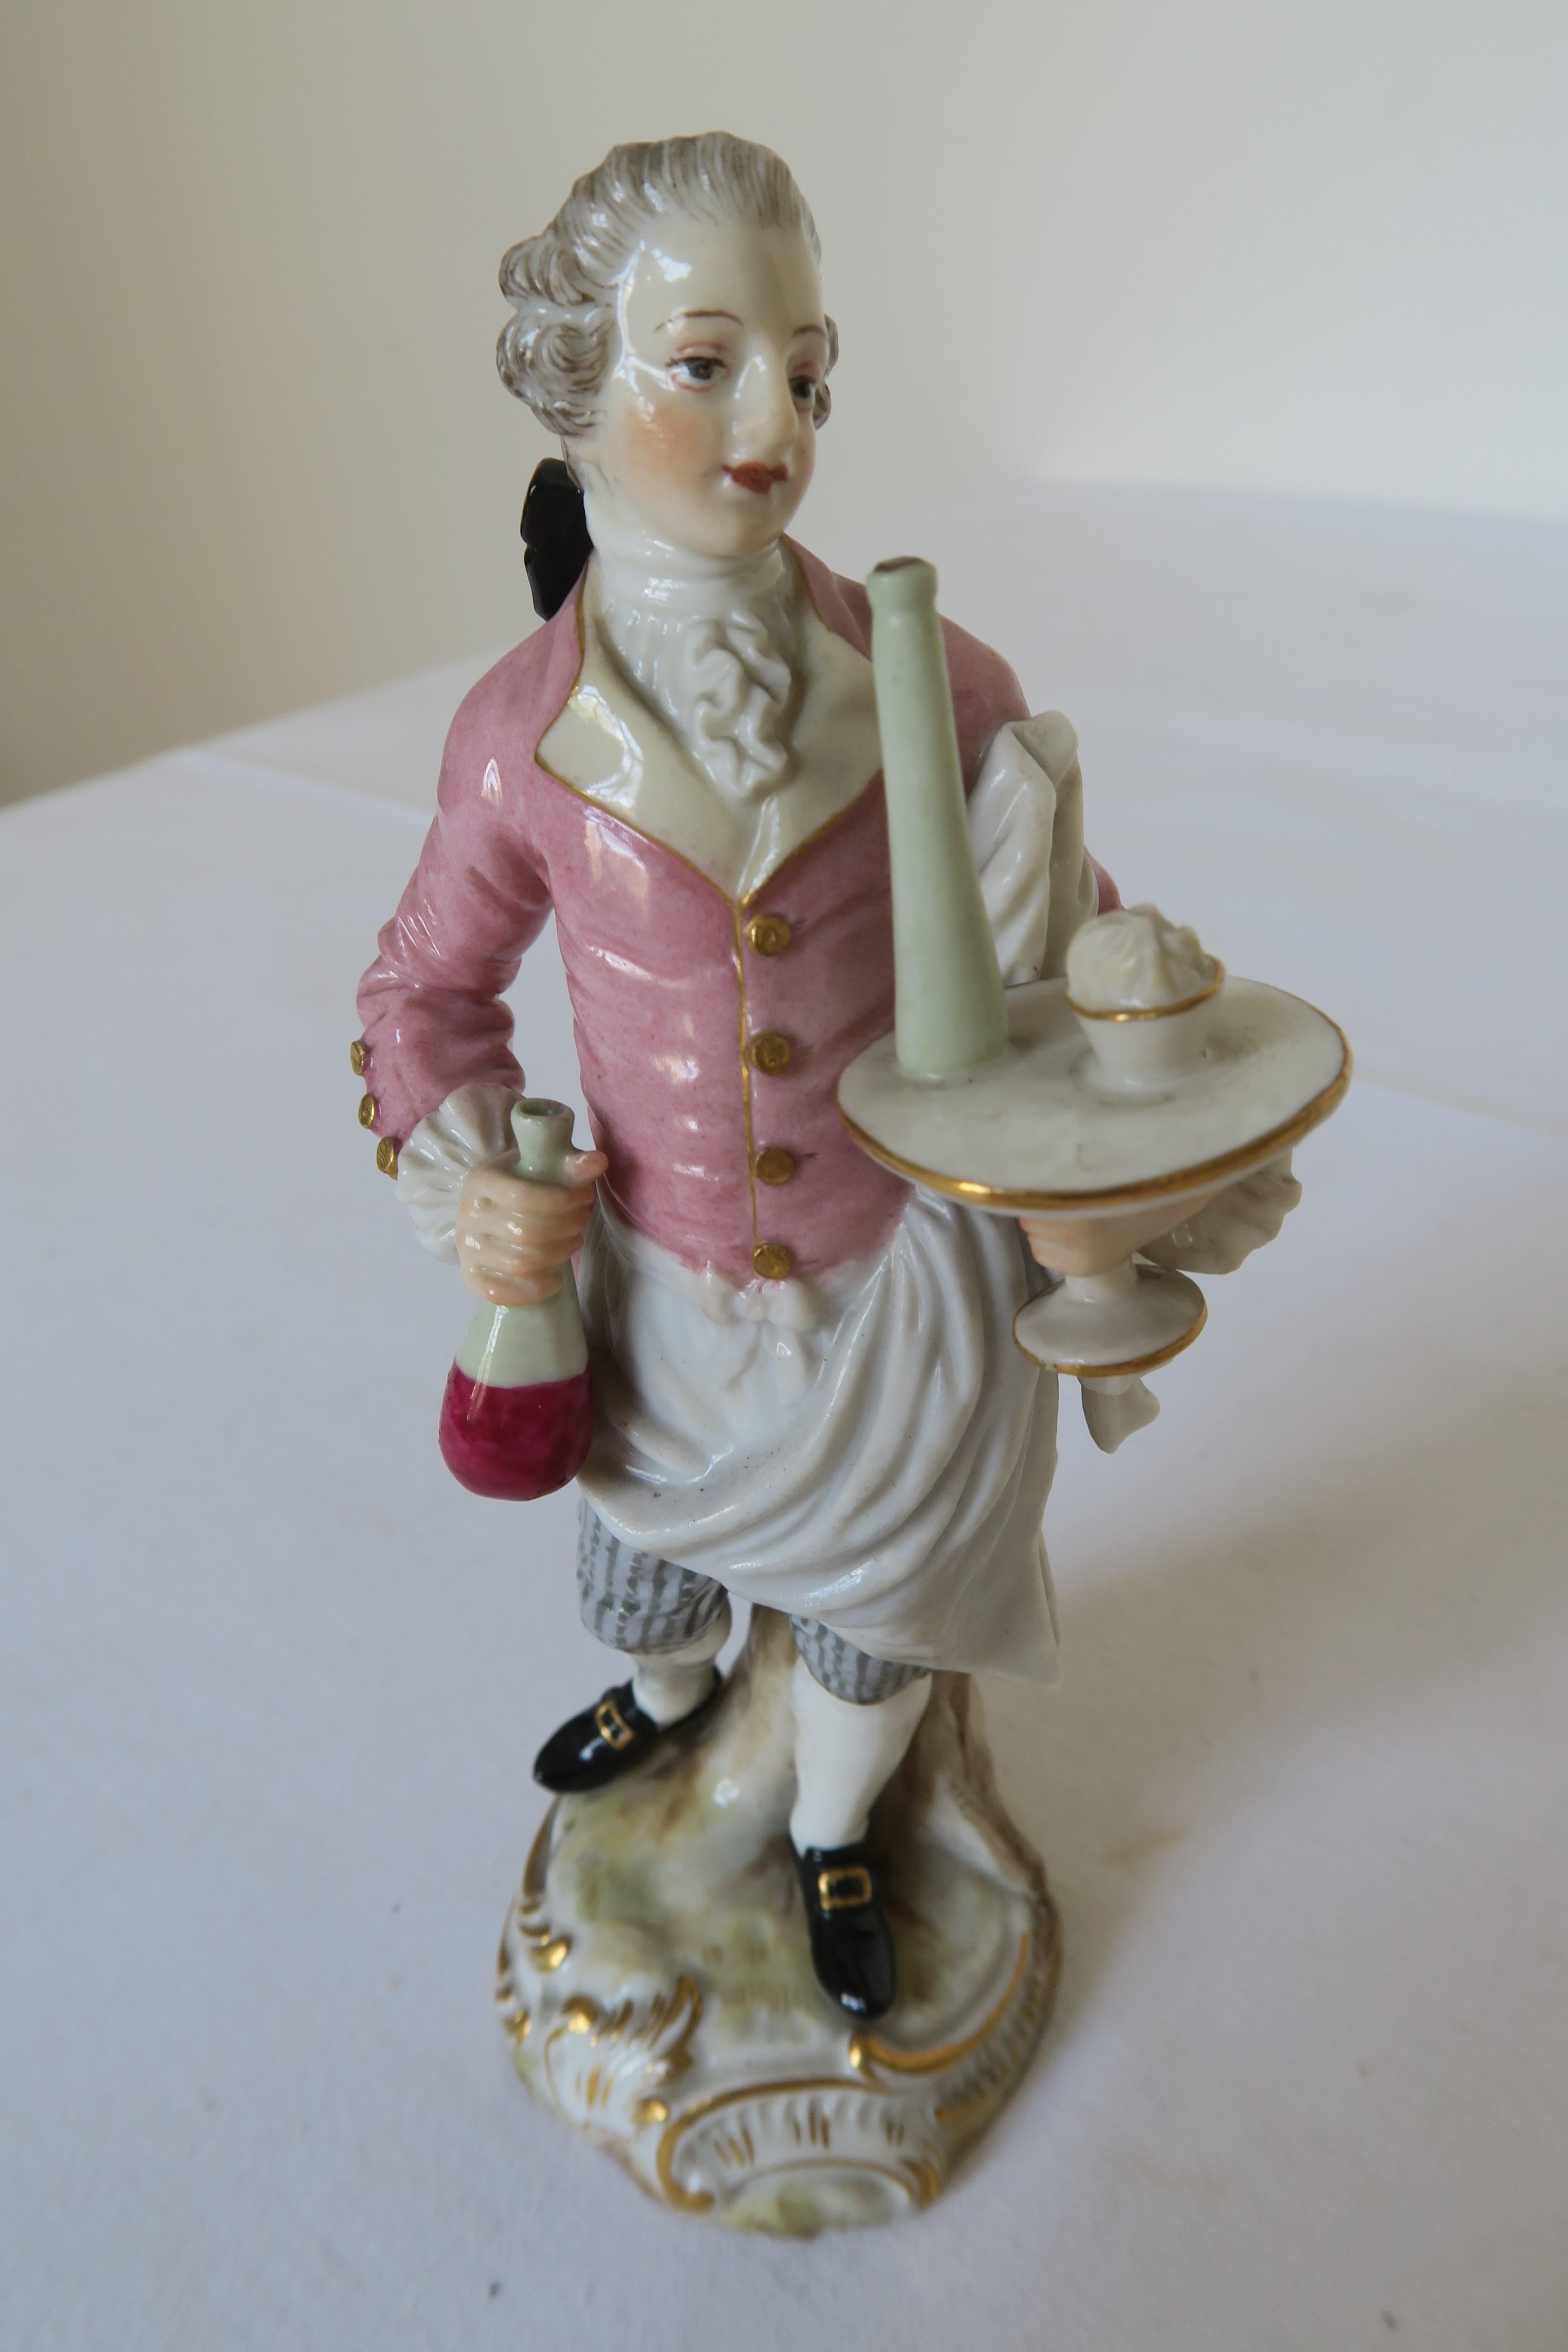 For sale in this ad you can find the prettiest little porcelain figurine. It was manufactured by Meissen Porcelain in the 1860s. The figurine depicts a water carrying a tray with food and drink. He looks brisk and happy to serve. The figurine was